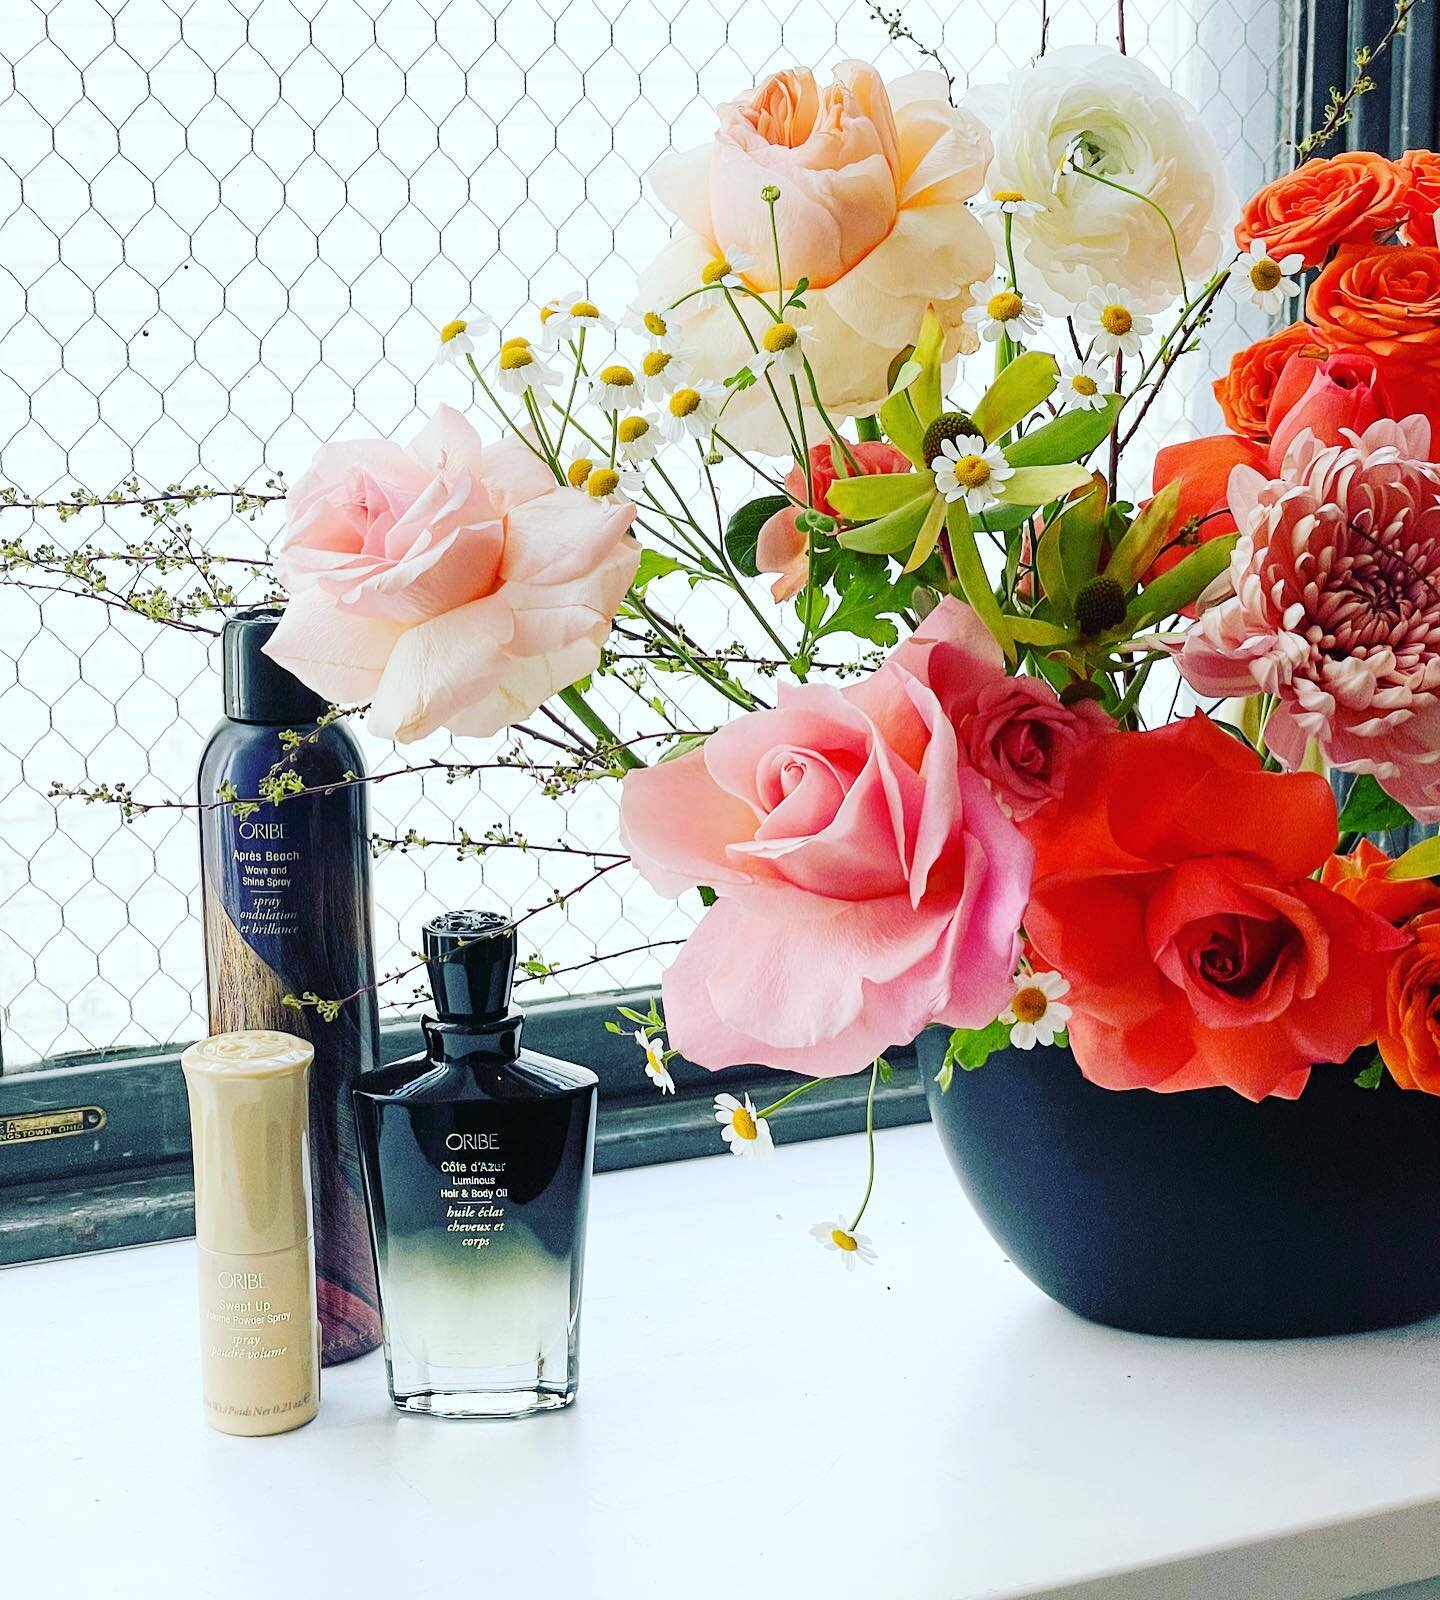 Hair products and flowers in the same building, name a better duo! Have we mentioned lately how much we love sharing space with @meraki_floral_co They make the building look so inviting and smell oh so good!